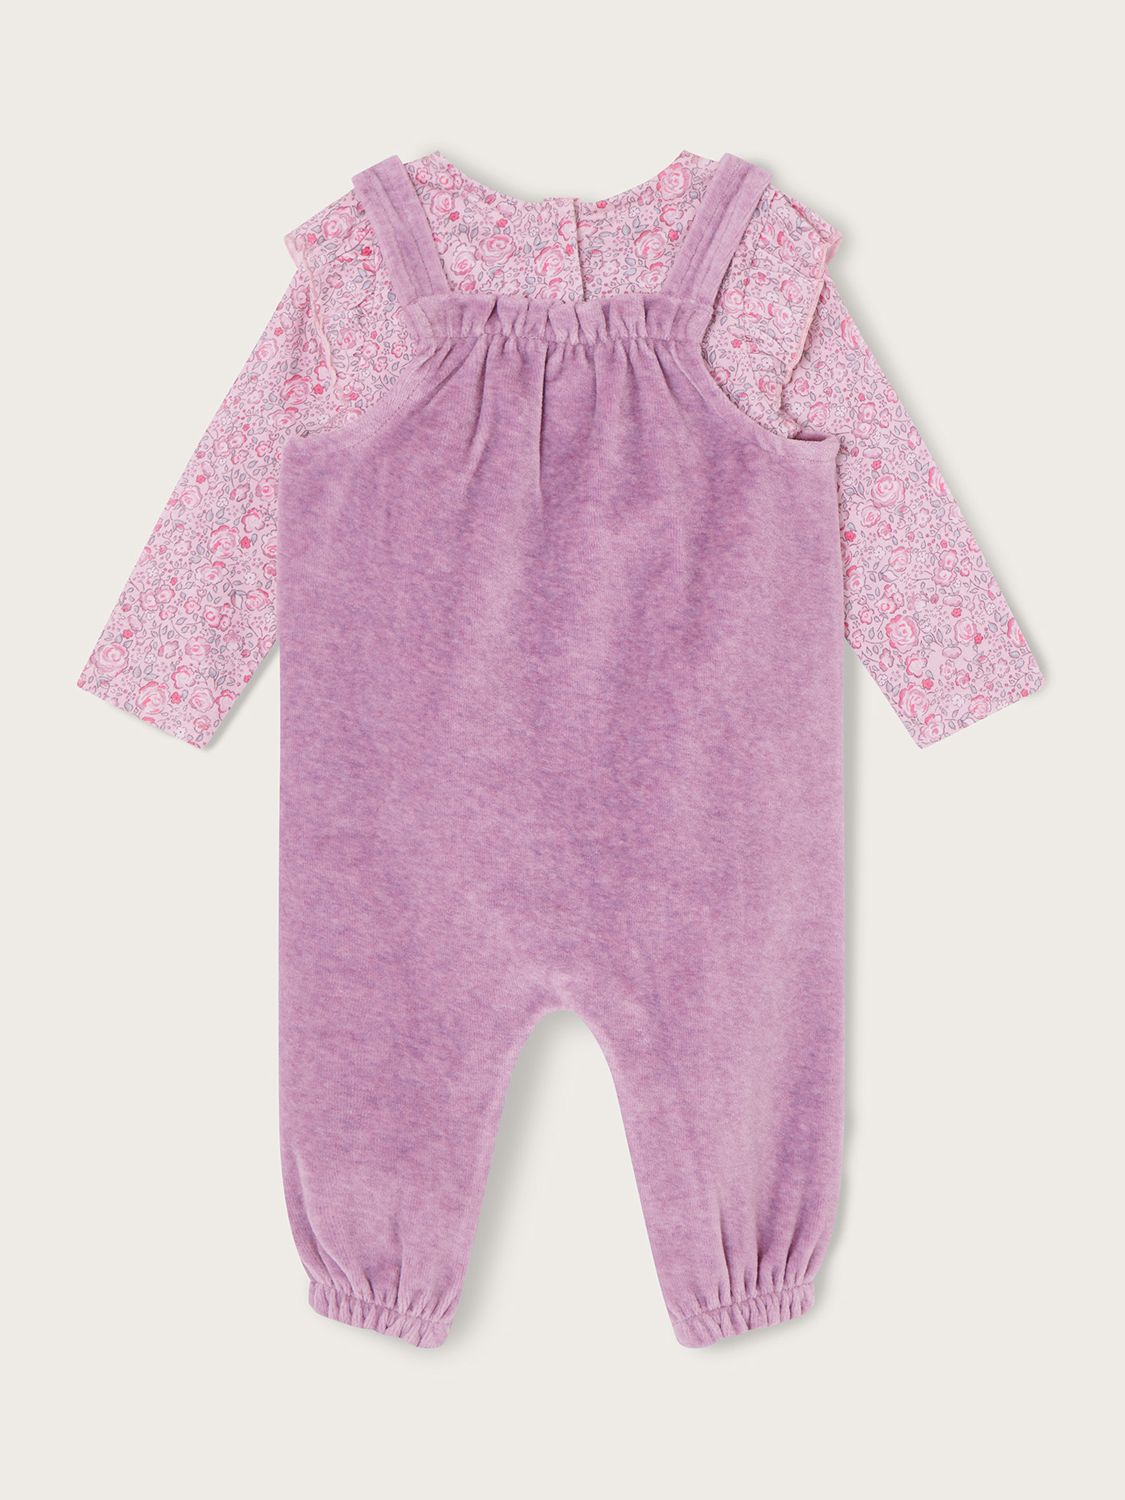 Buy Monsoon Baby Ditsy Print Top & Velour Romper Set, Lilac Online at johnlewis.com